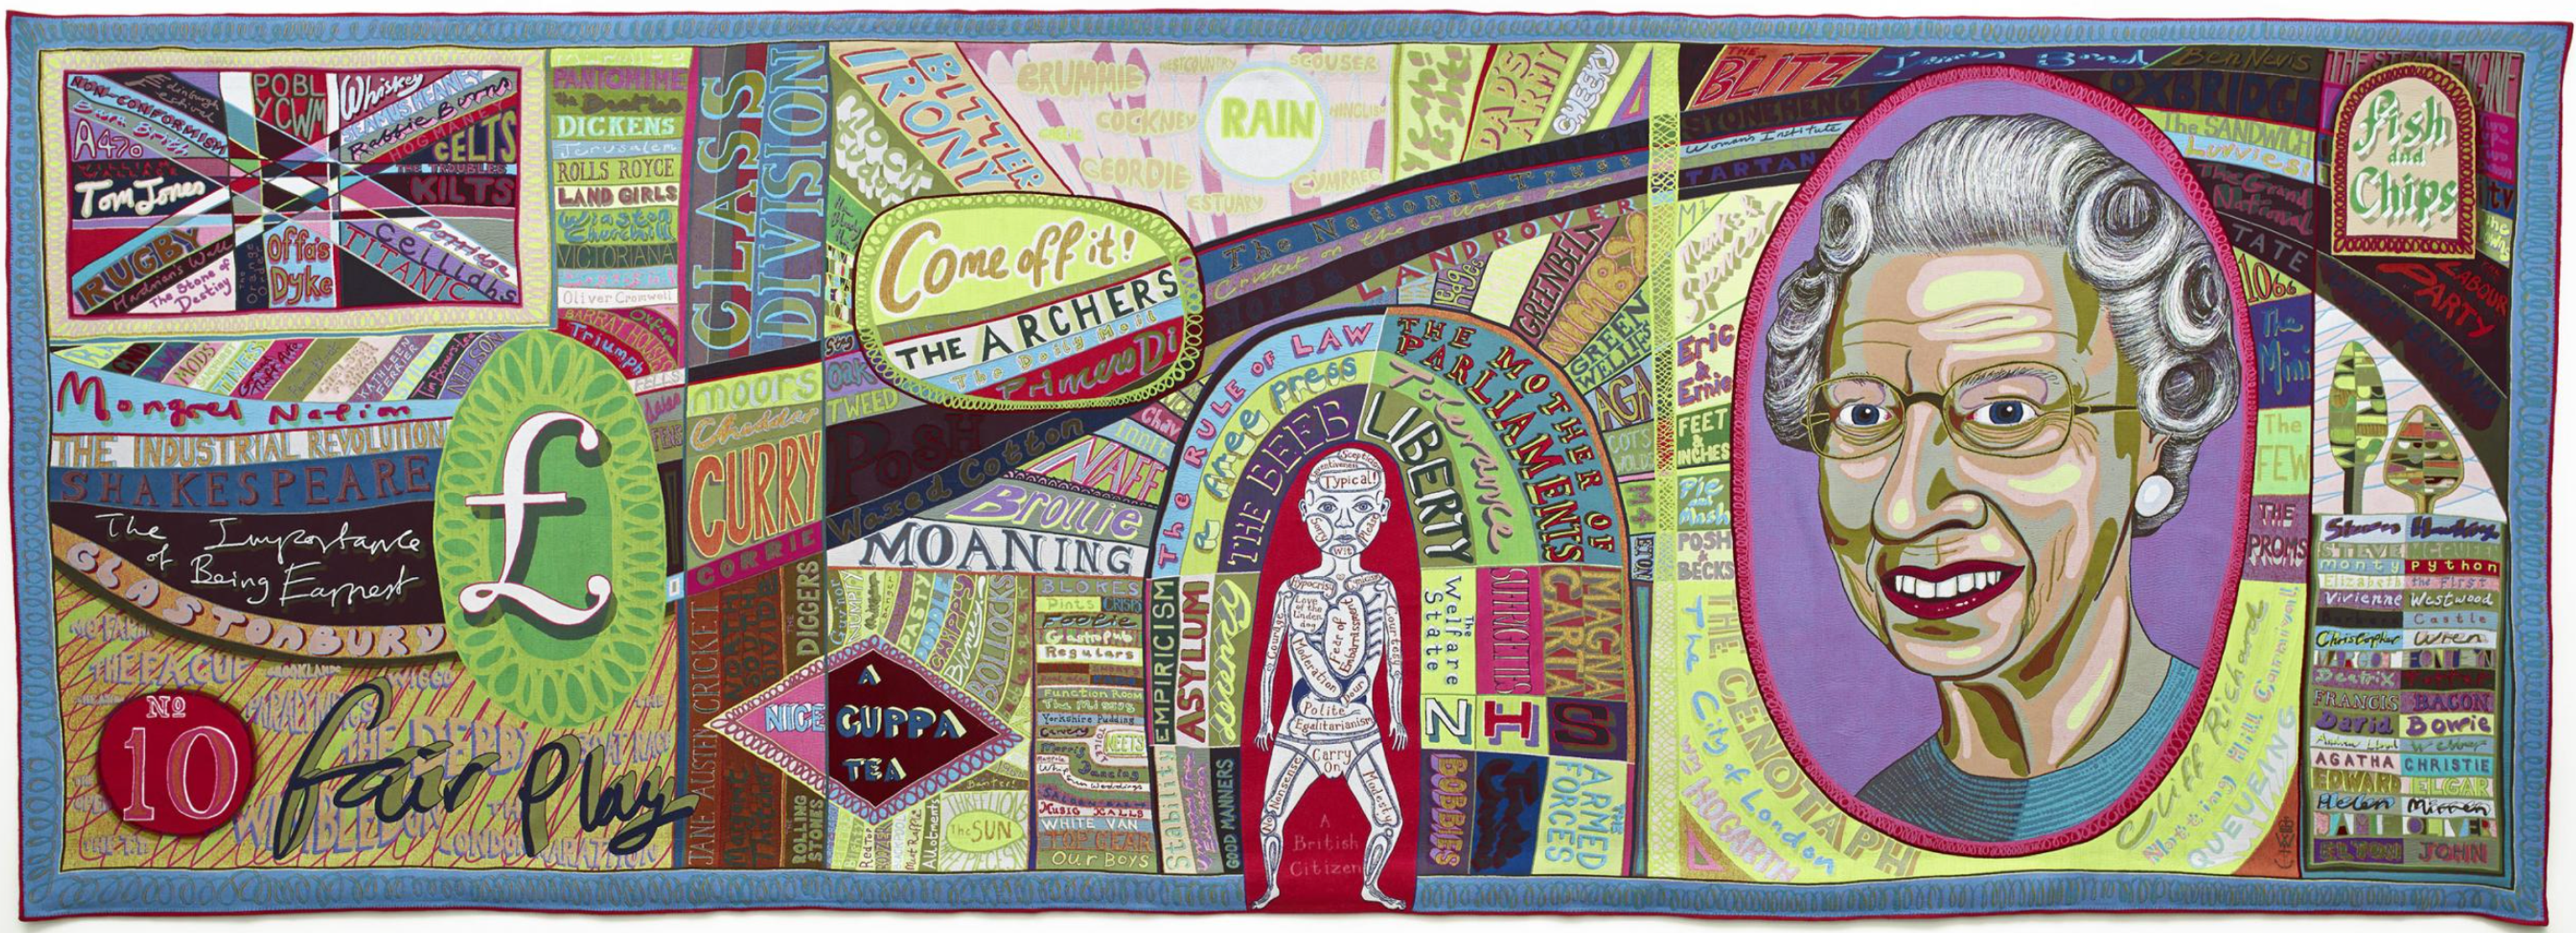 Colourful tapestry by Grayson Perry extending to 8 metres and modelled on a British ten-pound note, incorporating quintessentially British symbols like the Queen and a cup of tea, juxtaposed with nostalgic elements such as The Archers radio drama and the characteristic British rain.